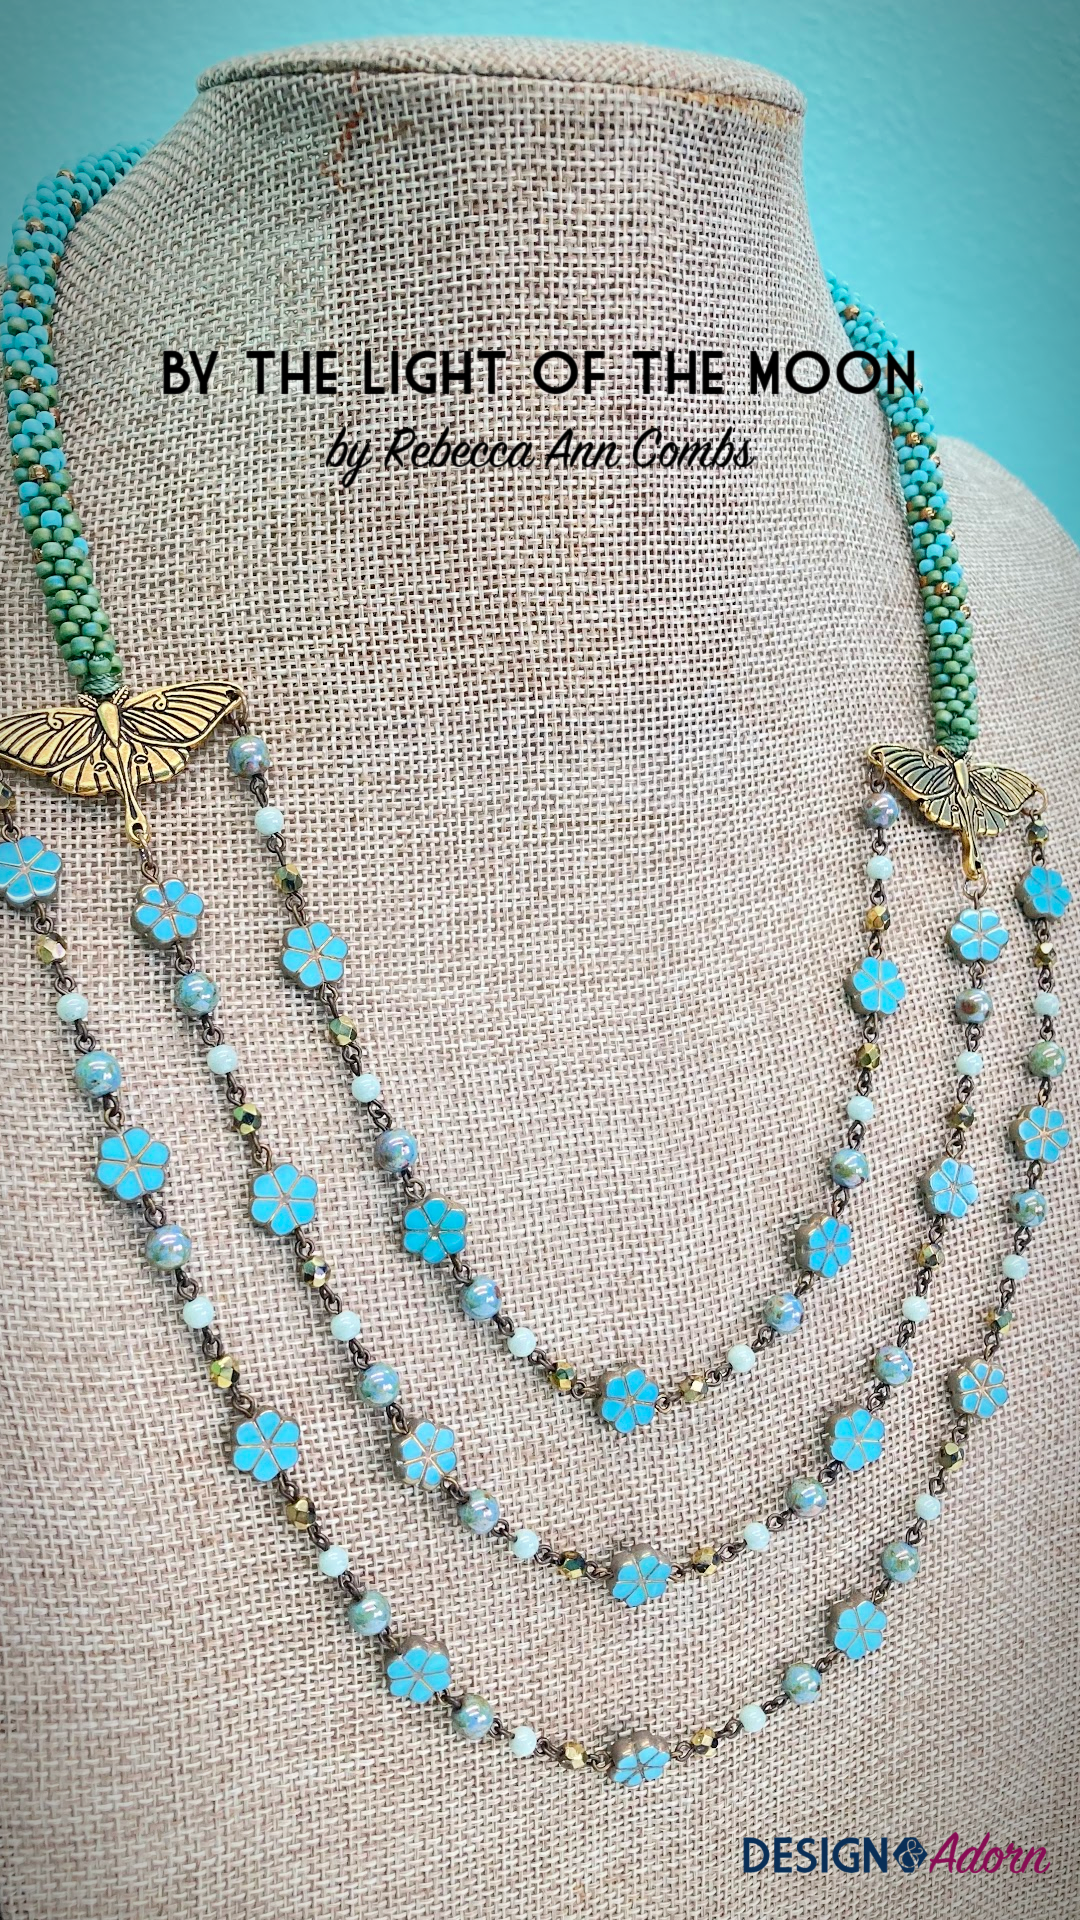 Three strands of Czech glass beads on chain joined by TierraCast luna moth pendants.  Beaded kumihimo ropes extend from the moths to finish the necklace.